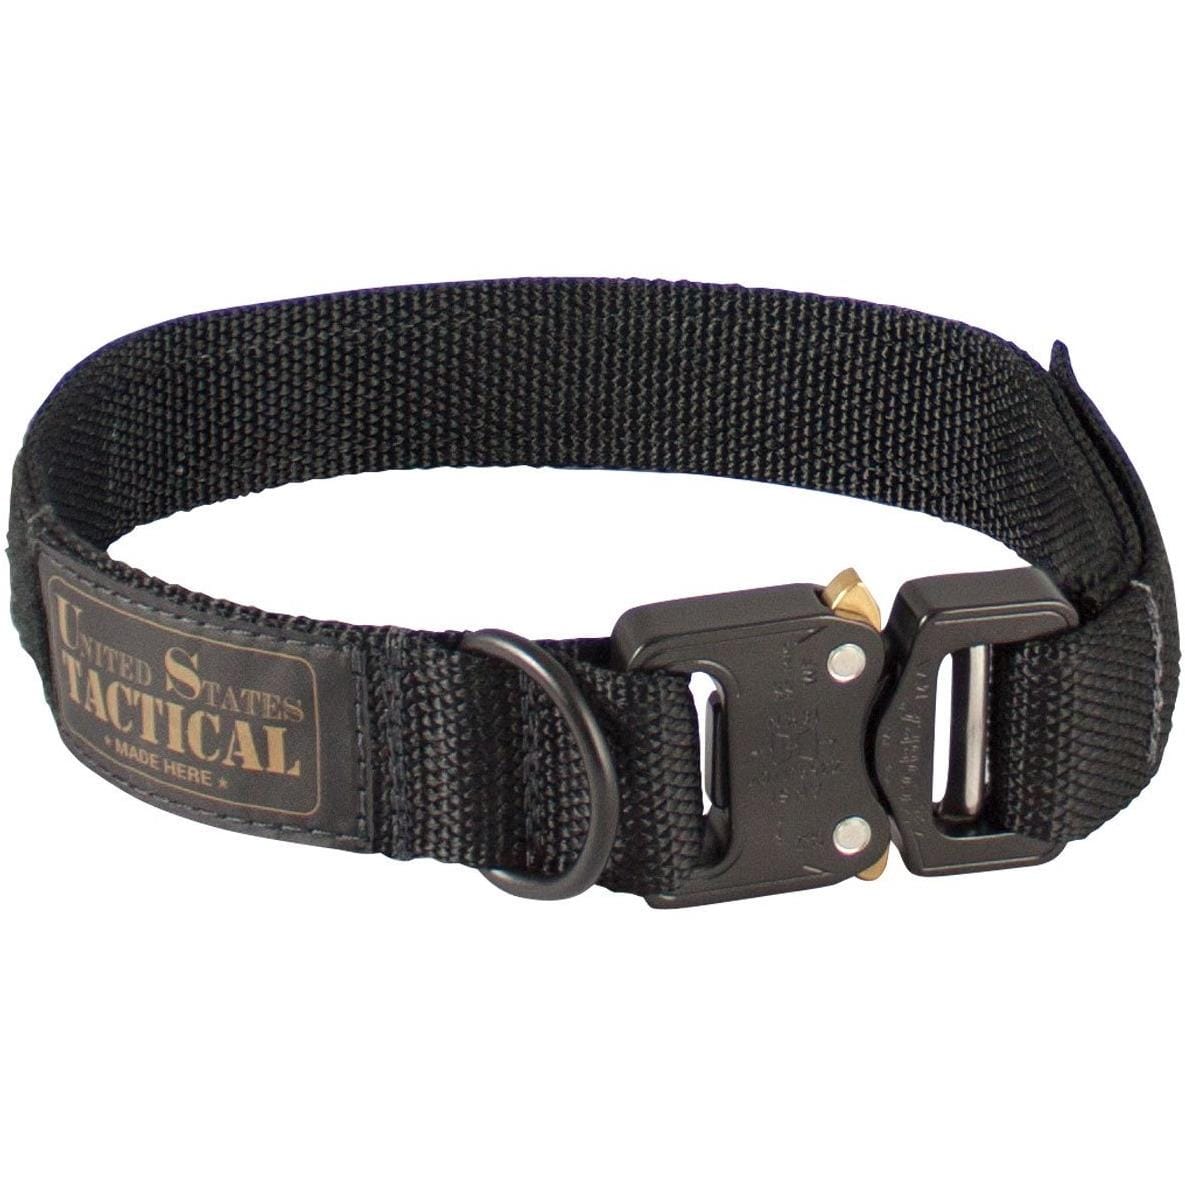 United States Tactical Tactical Gear M / Black United States Tactical Dog Collar with COBRA Buckle